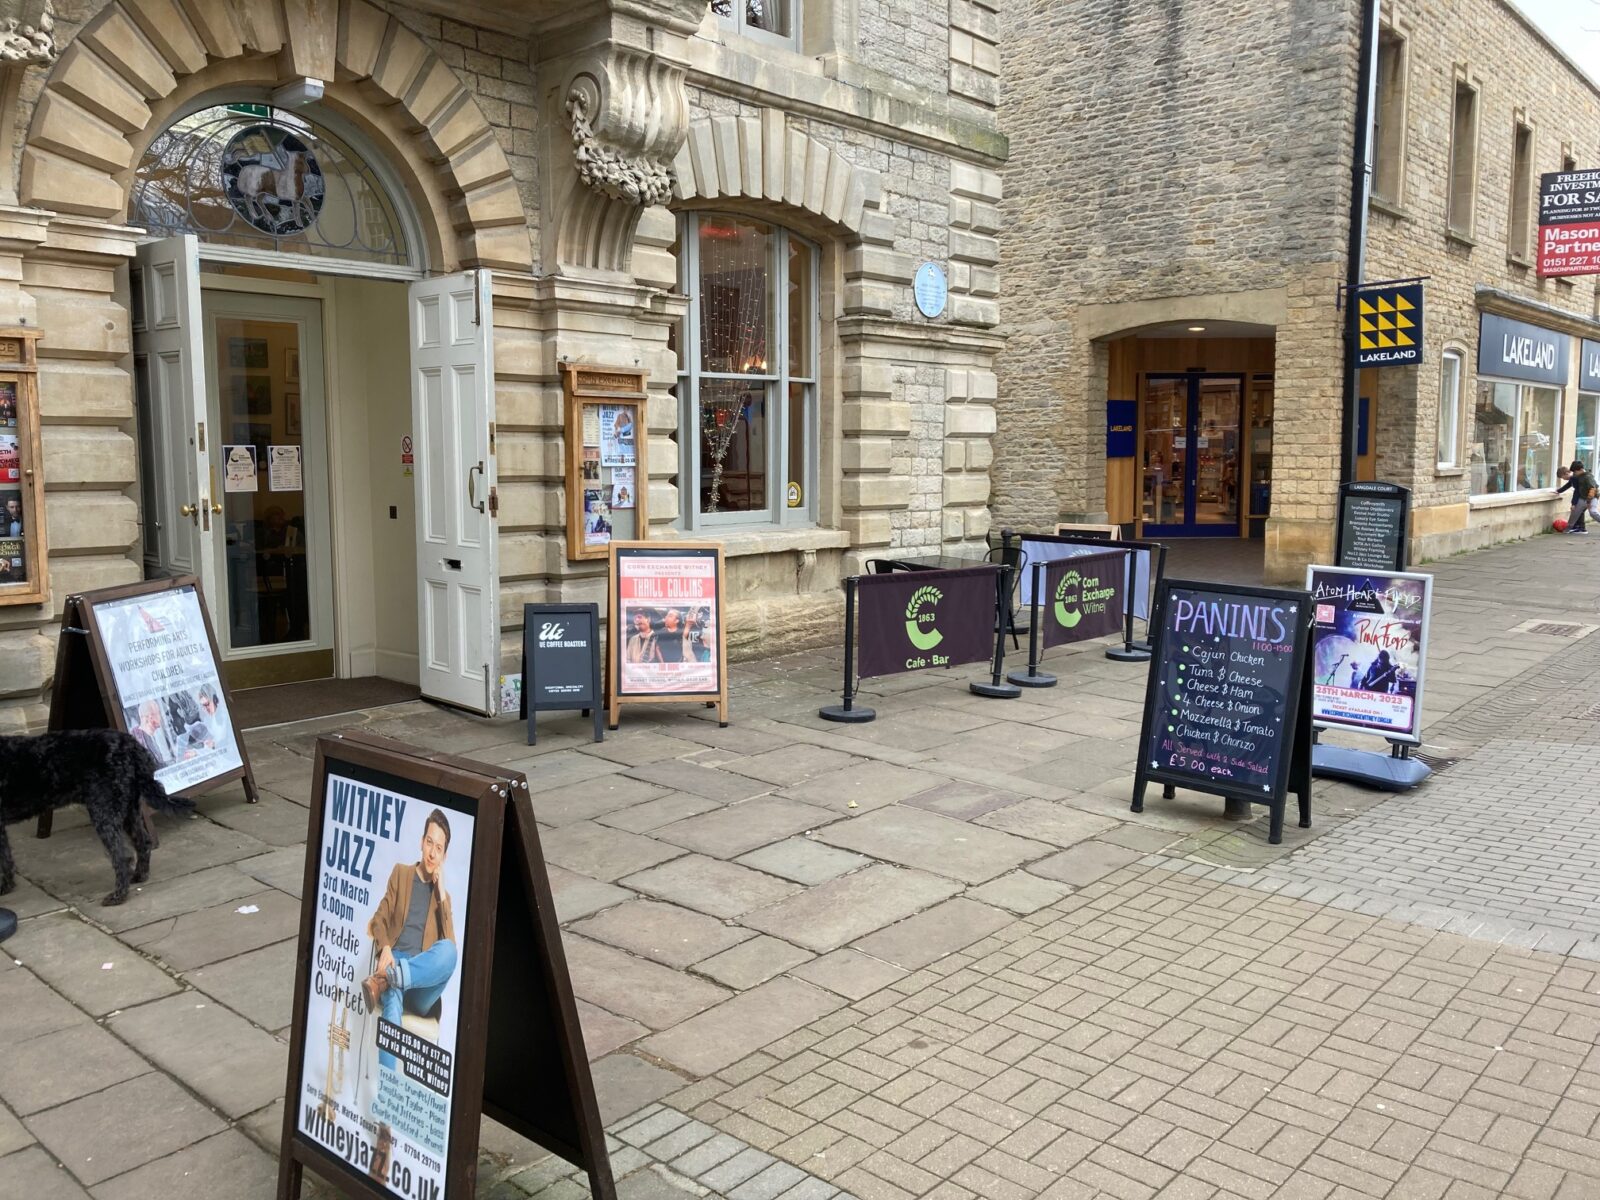 A busy month for the Corn Exchange - bringing business and busy-ness into Witney